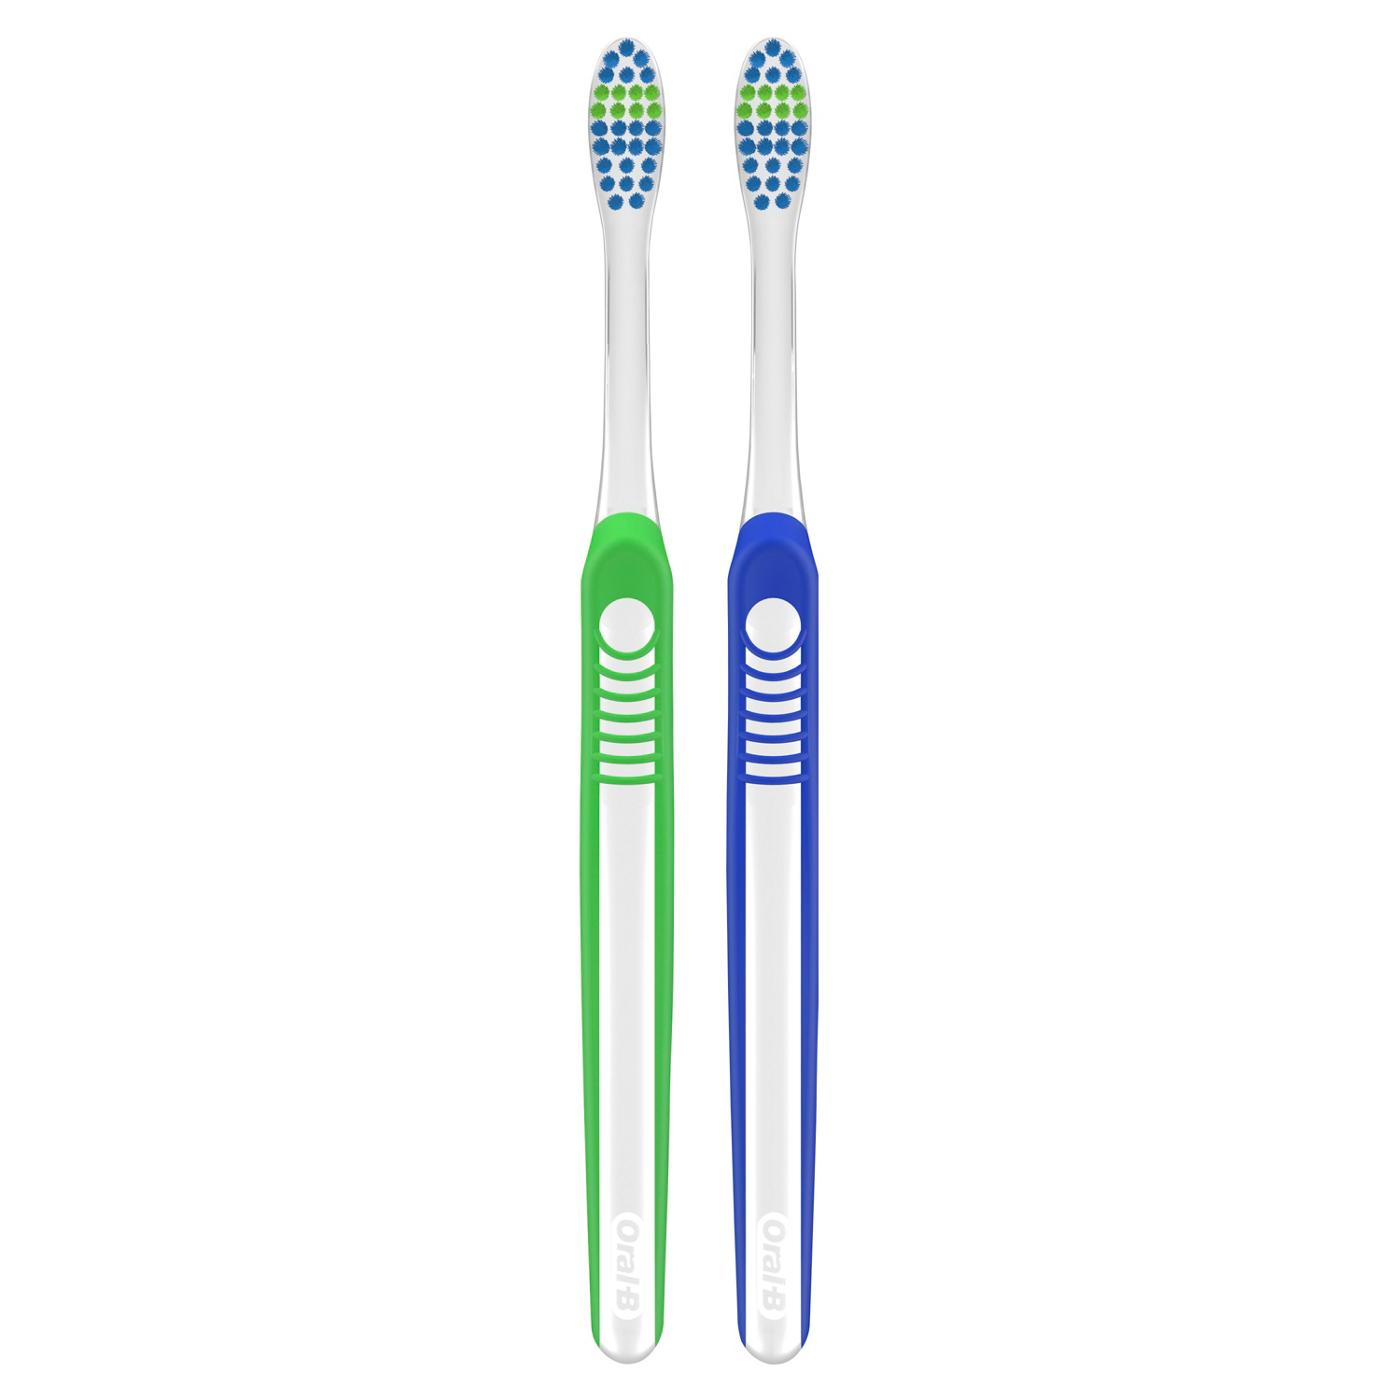 Oral-B Indicator Max Soft Toothbrushes; image 6 of 7